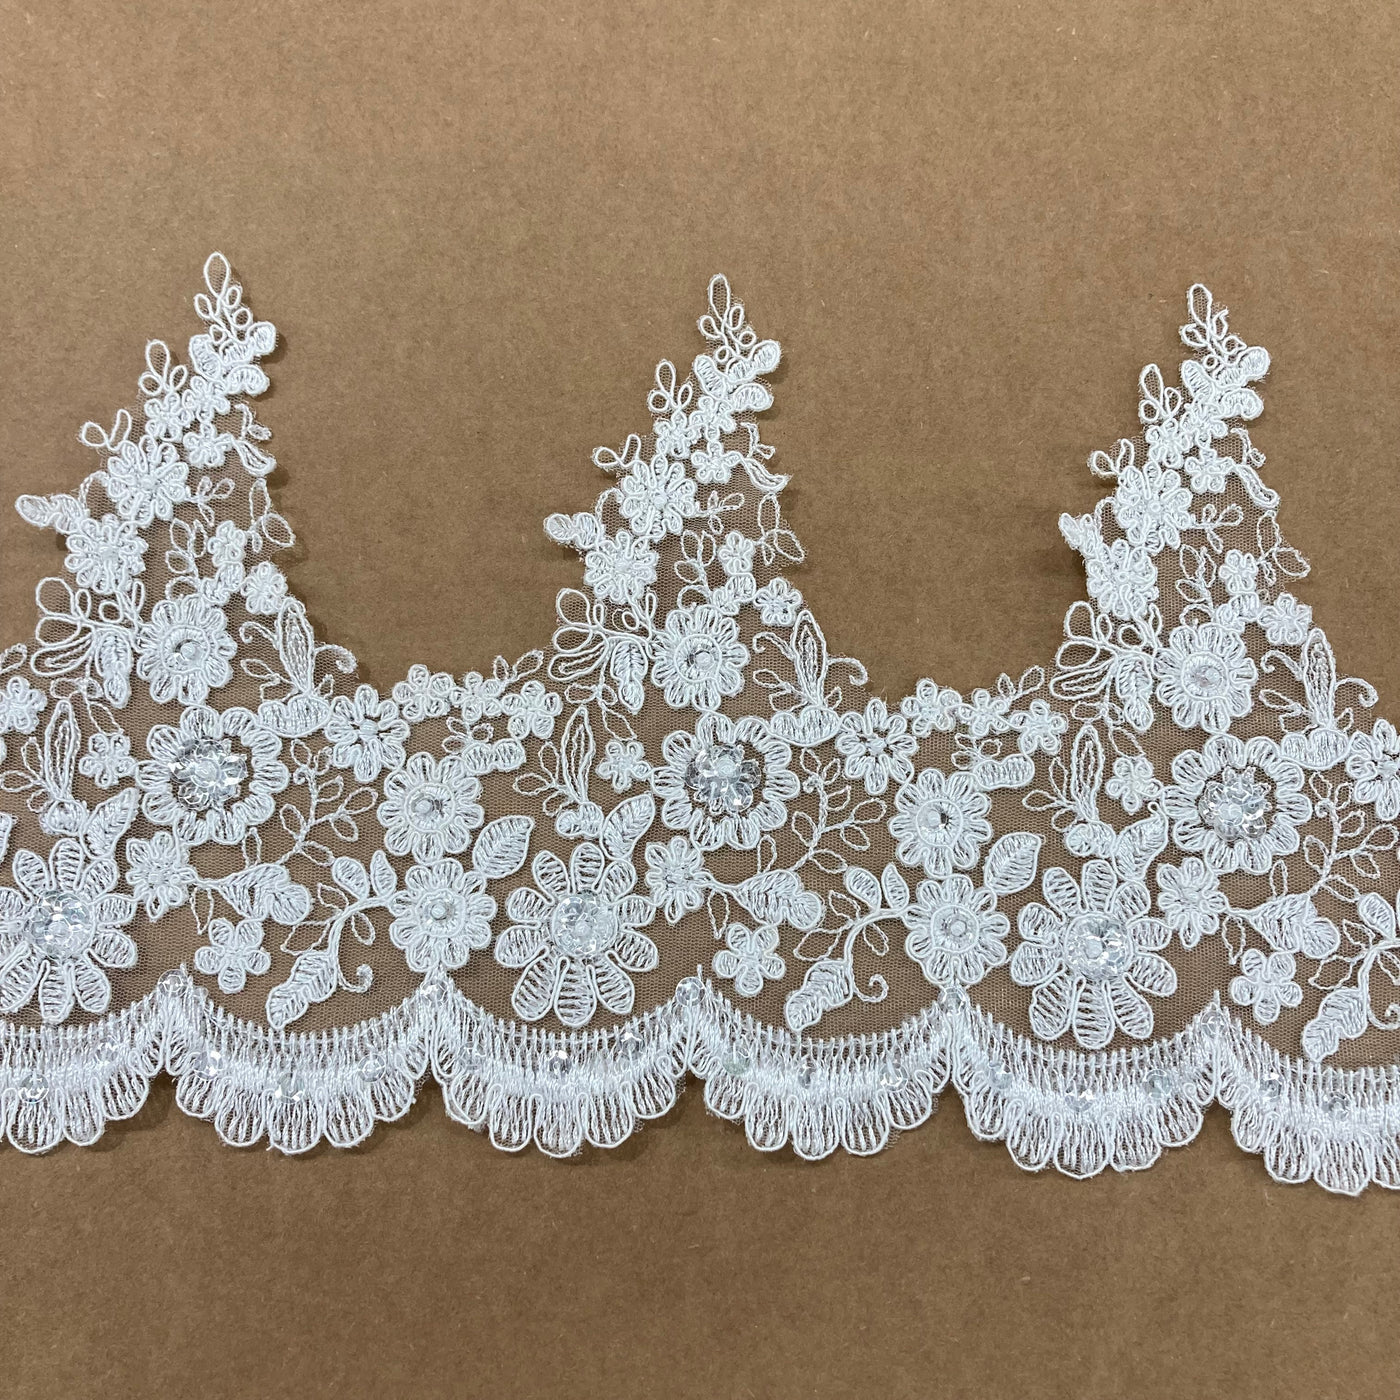 Corded & Beaded Trimming Lace, Embroidered on 100% Polyester Net Mesh. Lace Usa